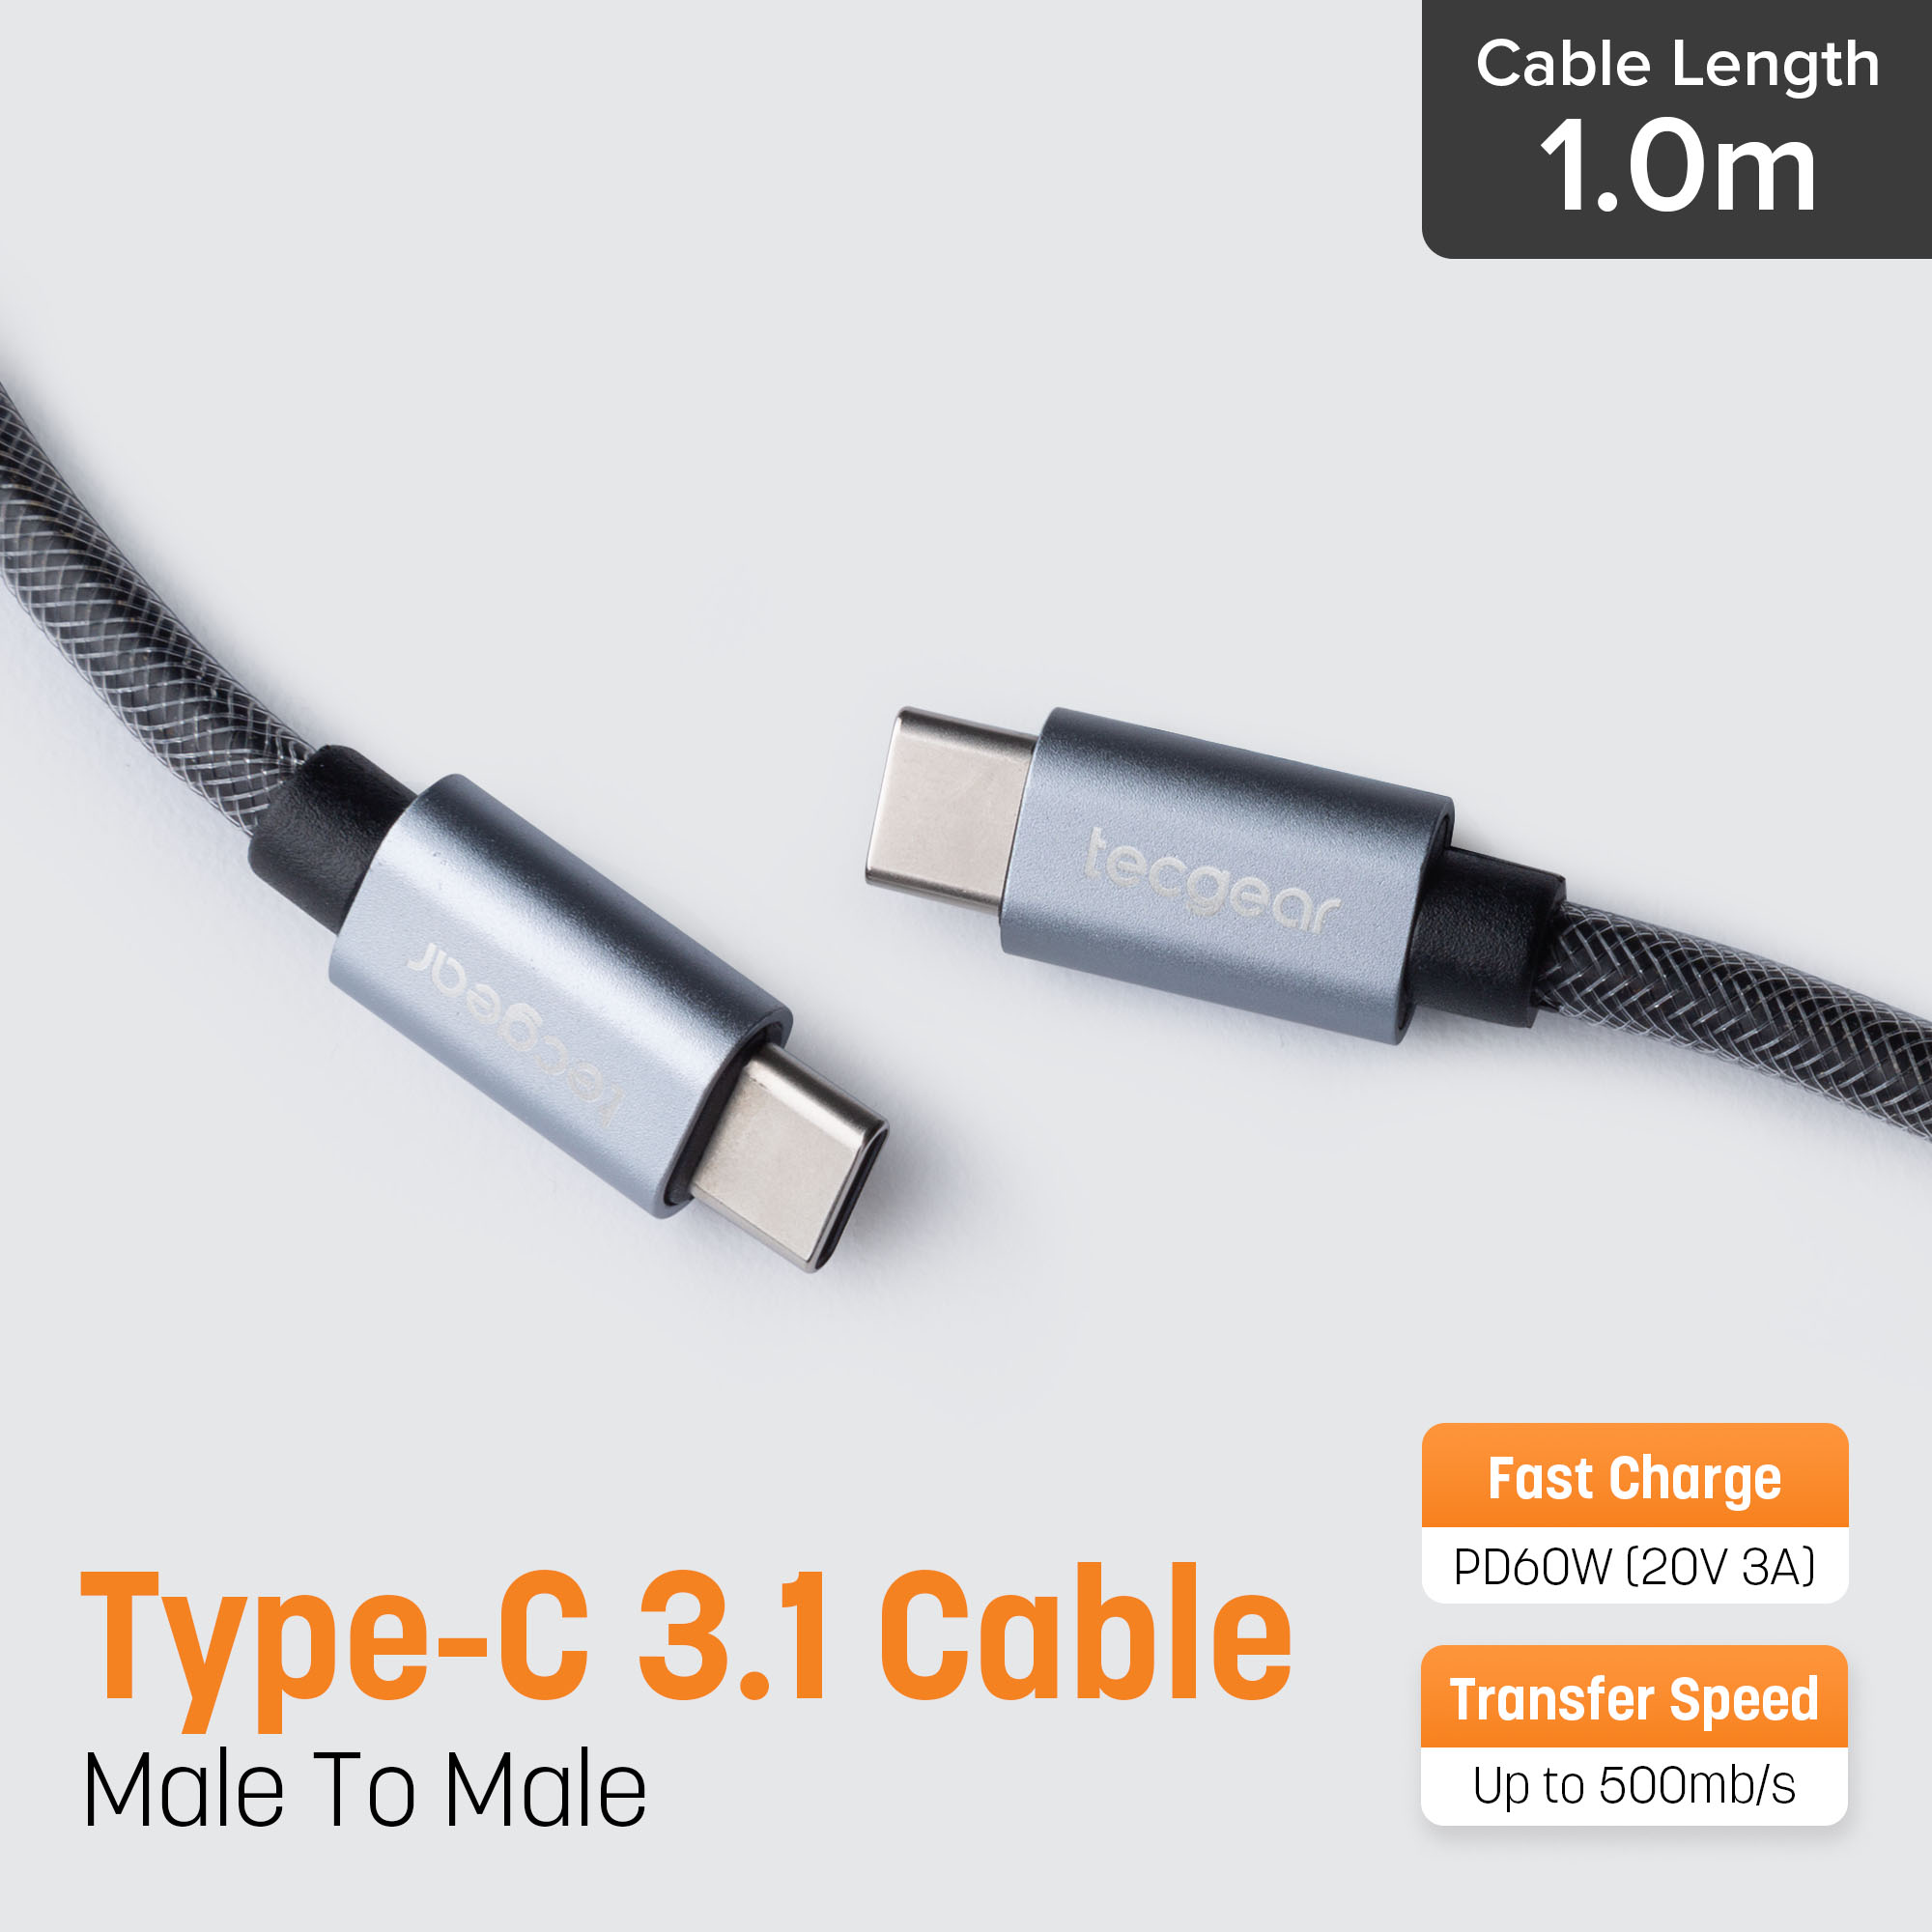 Type-C 3.1 Cable 1.0m